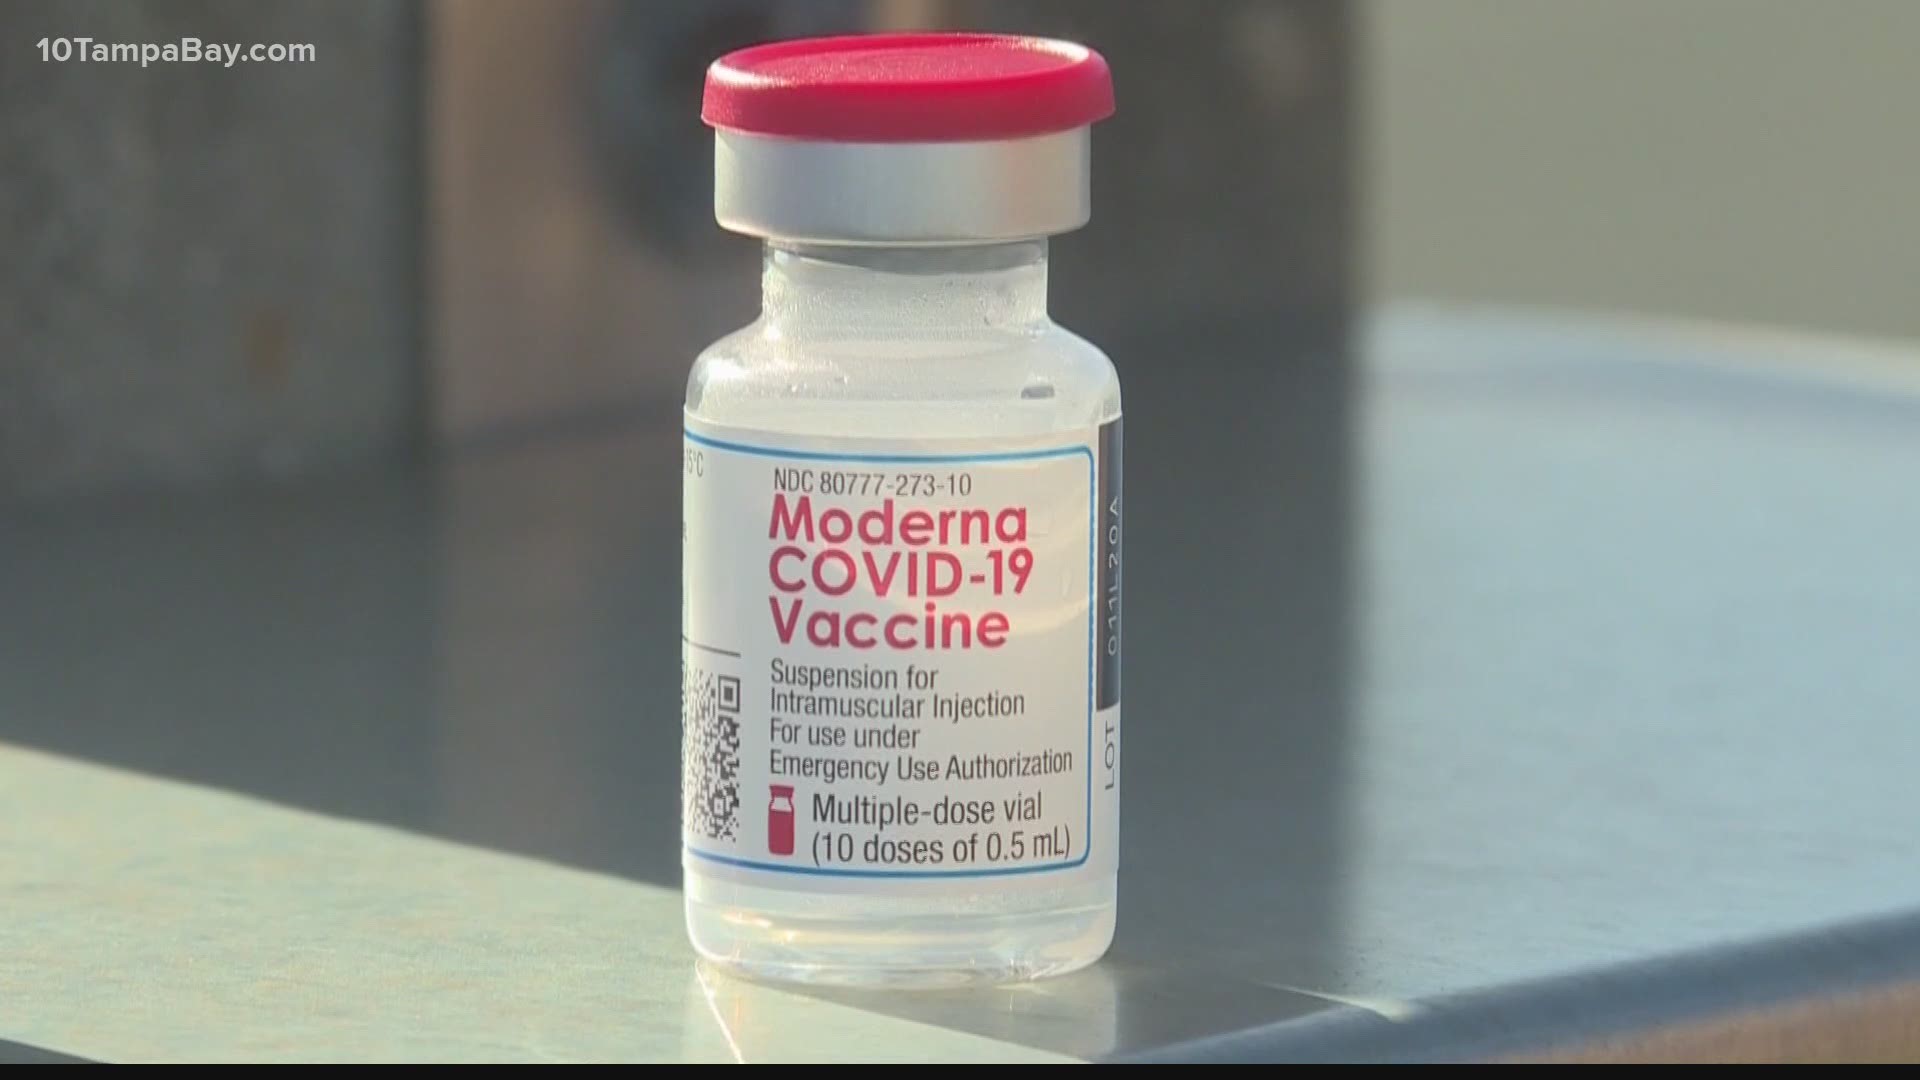 Under the Federal Retail Pharmacy Program, Publix, Winn-Dixie and Walmart are set to receive COVID-19 vaccine doses this week.